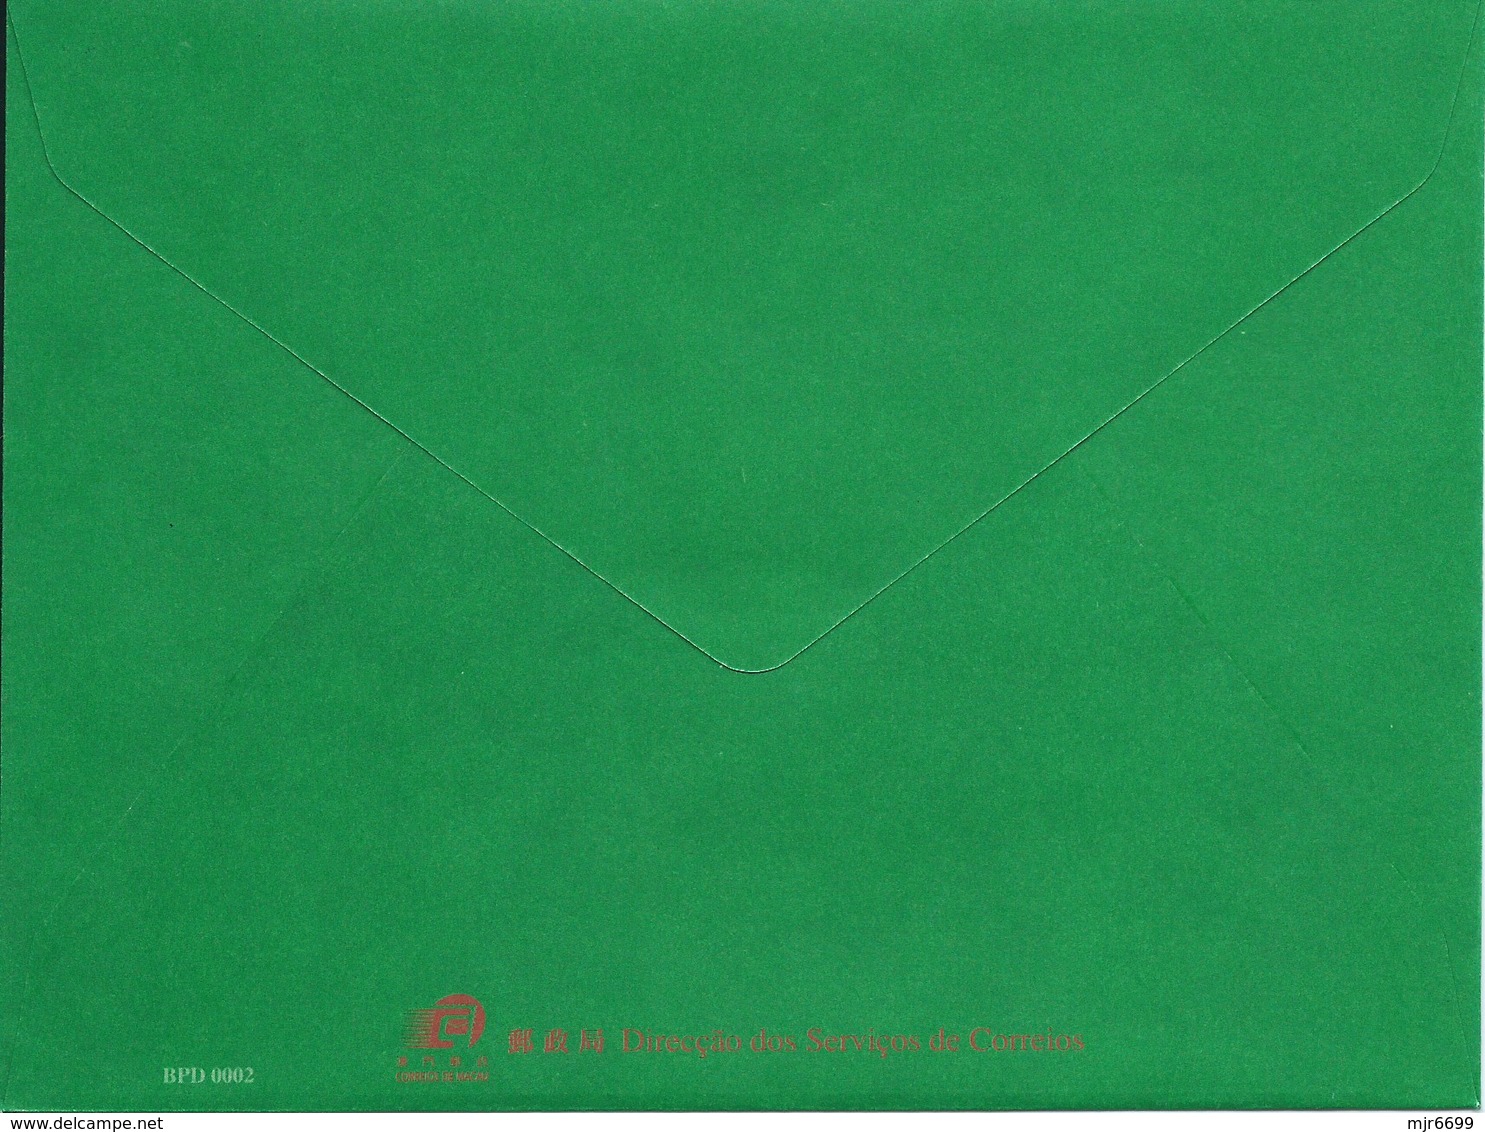 MACAU 2001 CHRISTMAS GREETING CARD & POSTAGE PAID COVER,  POST OFFICE CODE #BPD002 - Postal Stationery